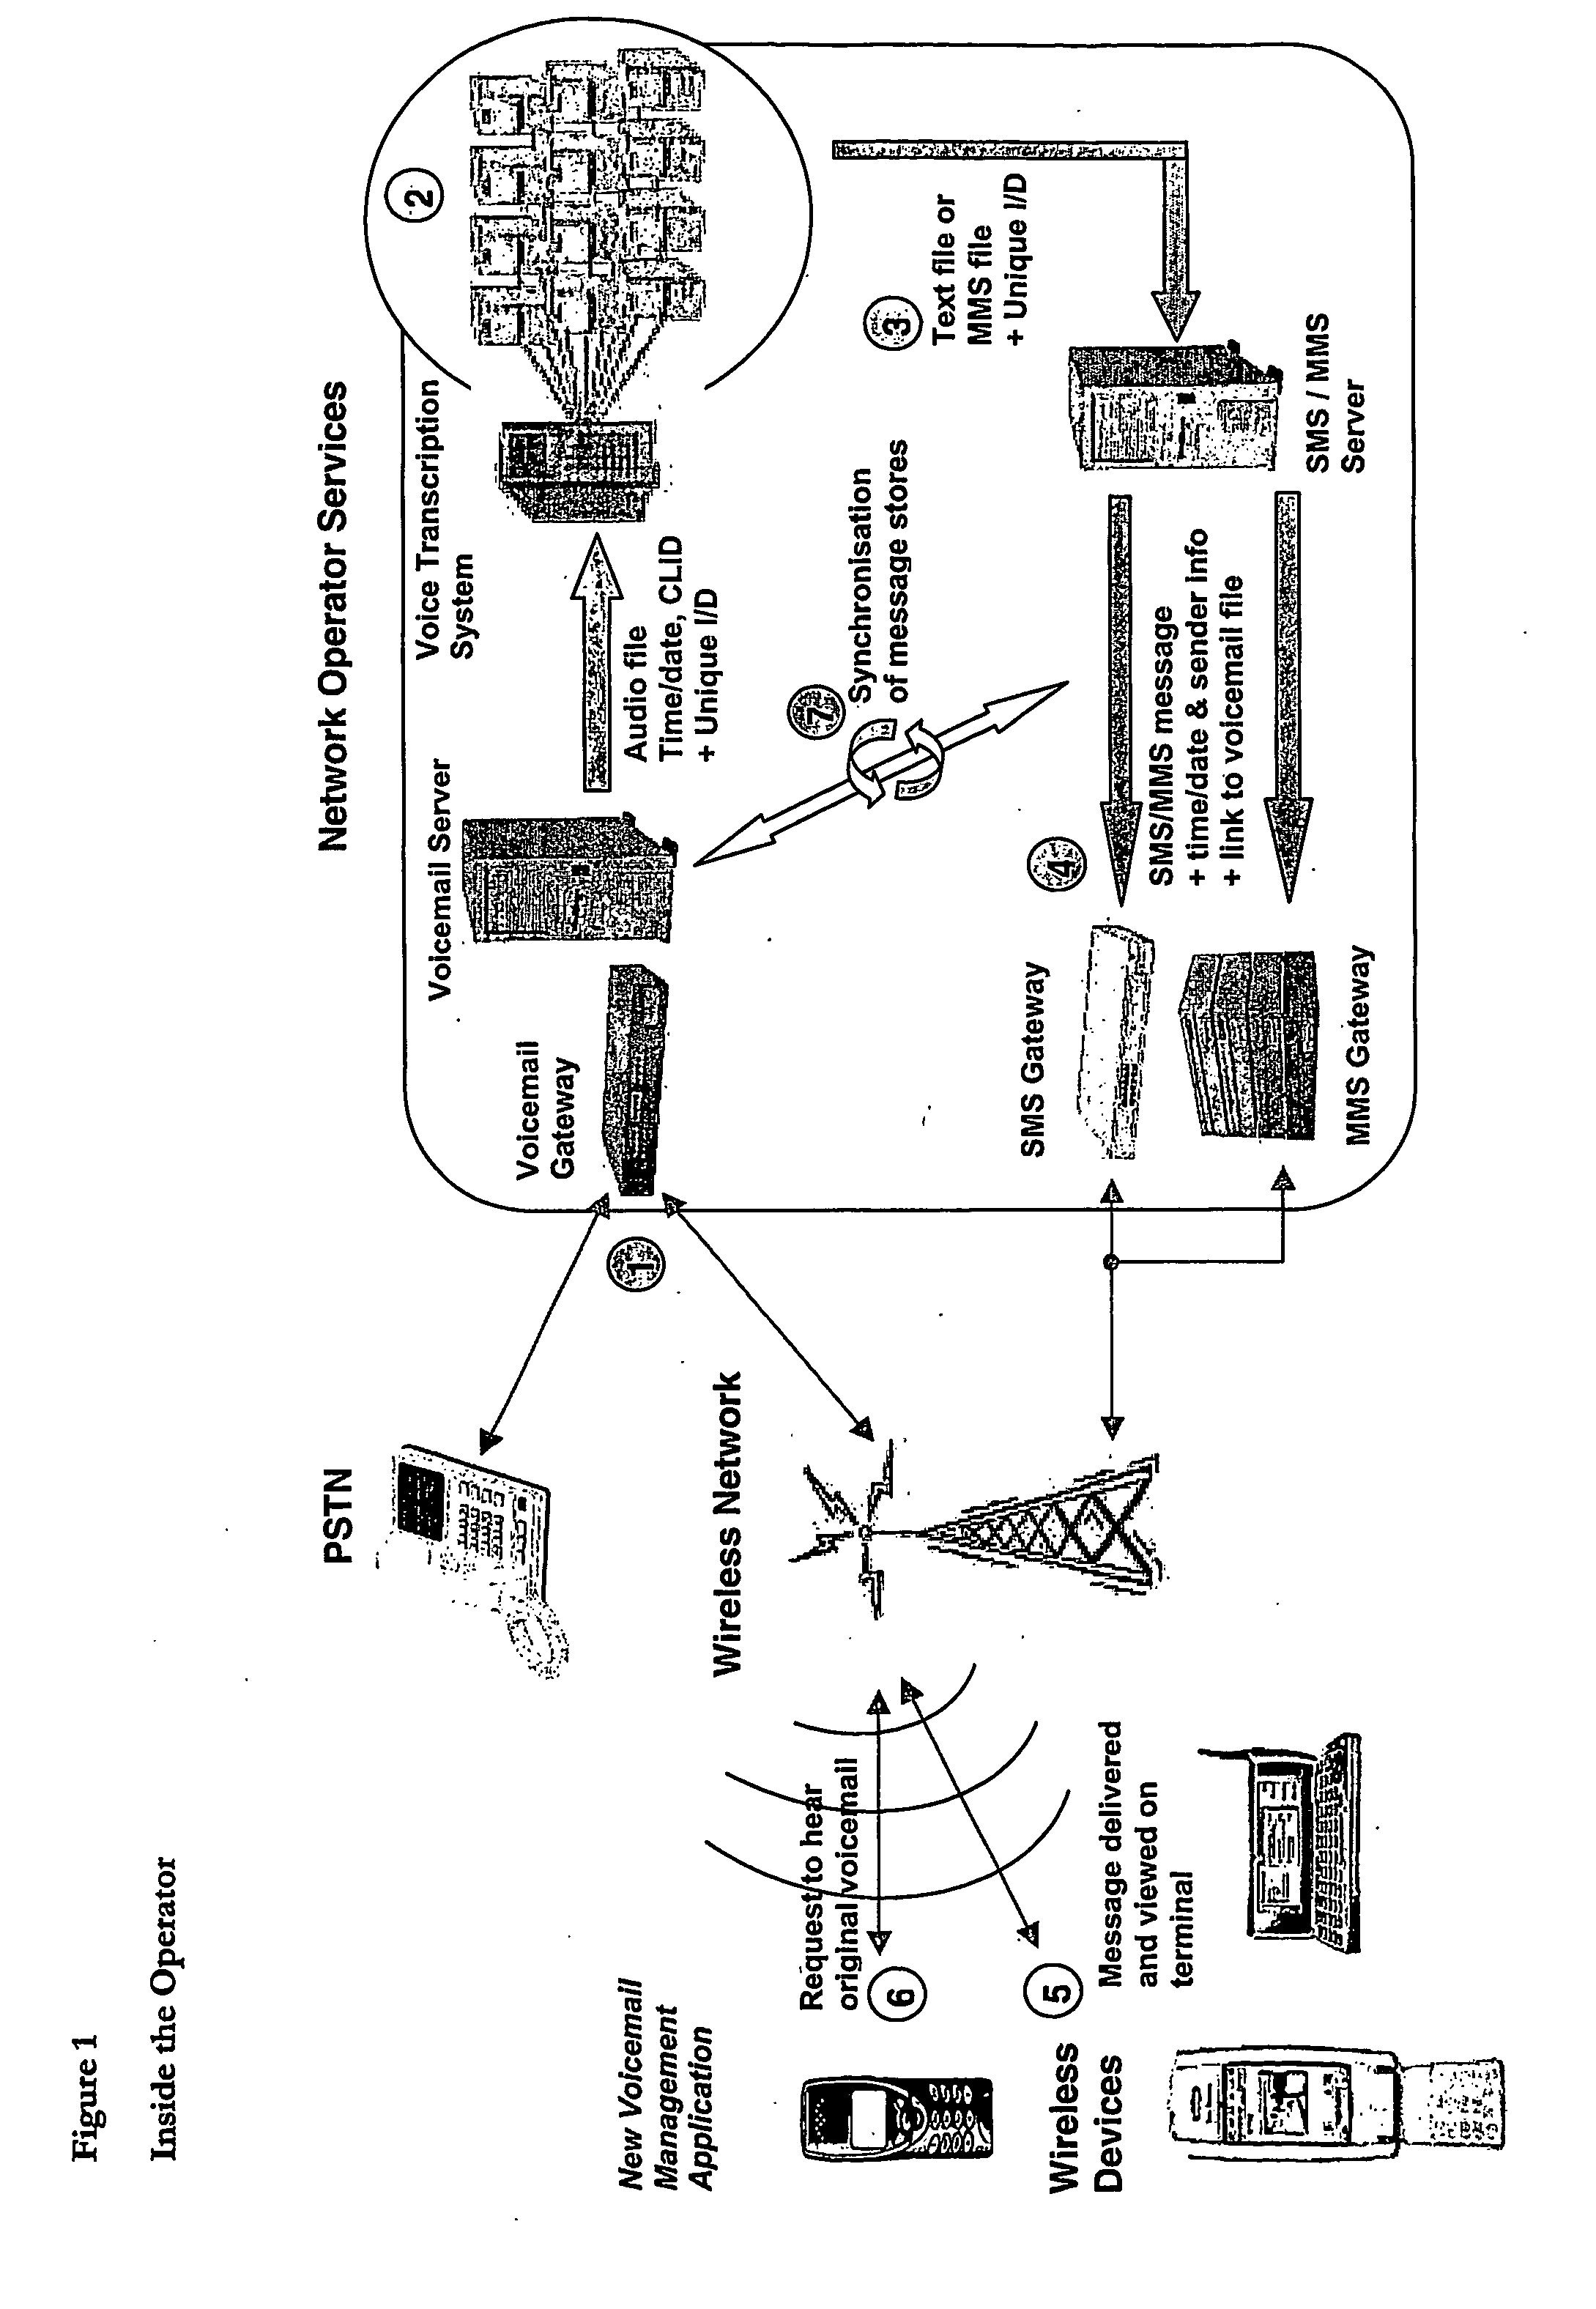 Method of providing voicemails to a wireless information device